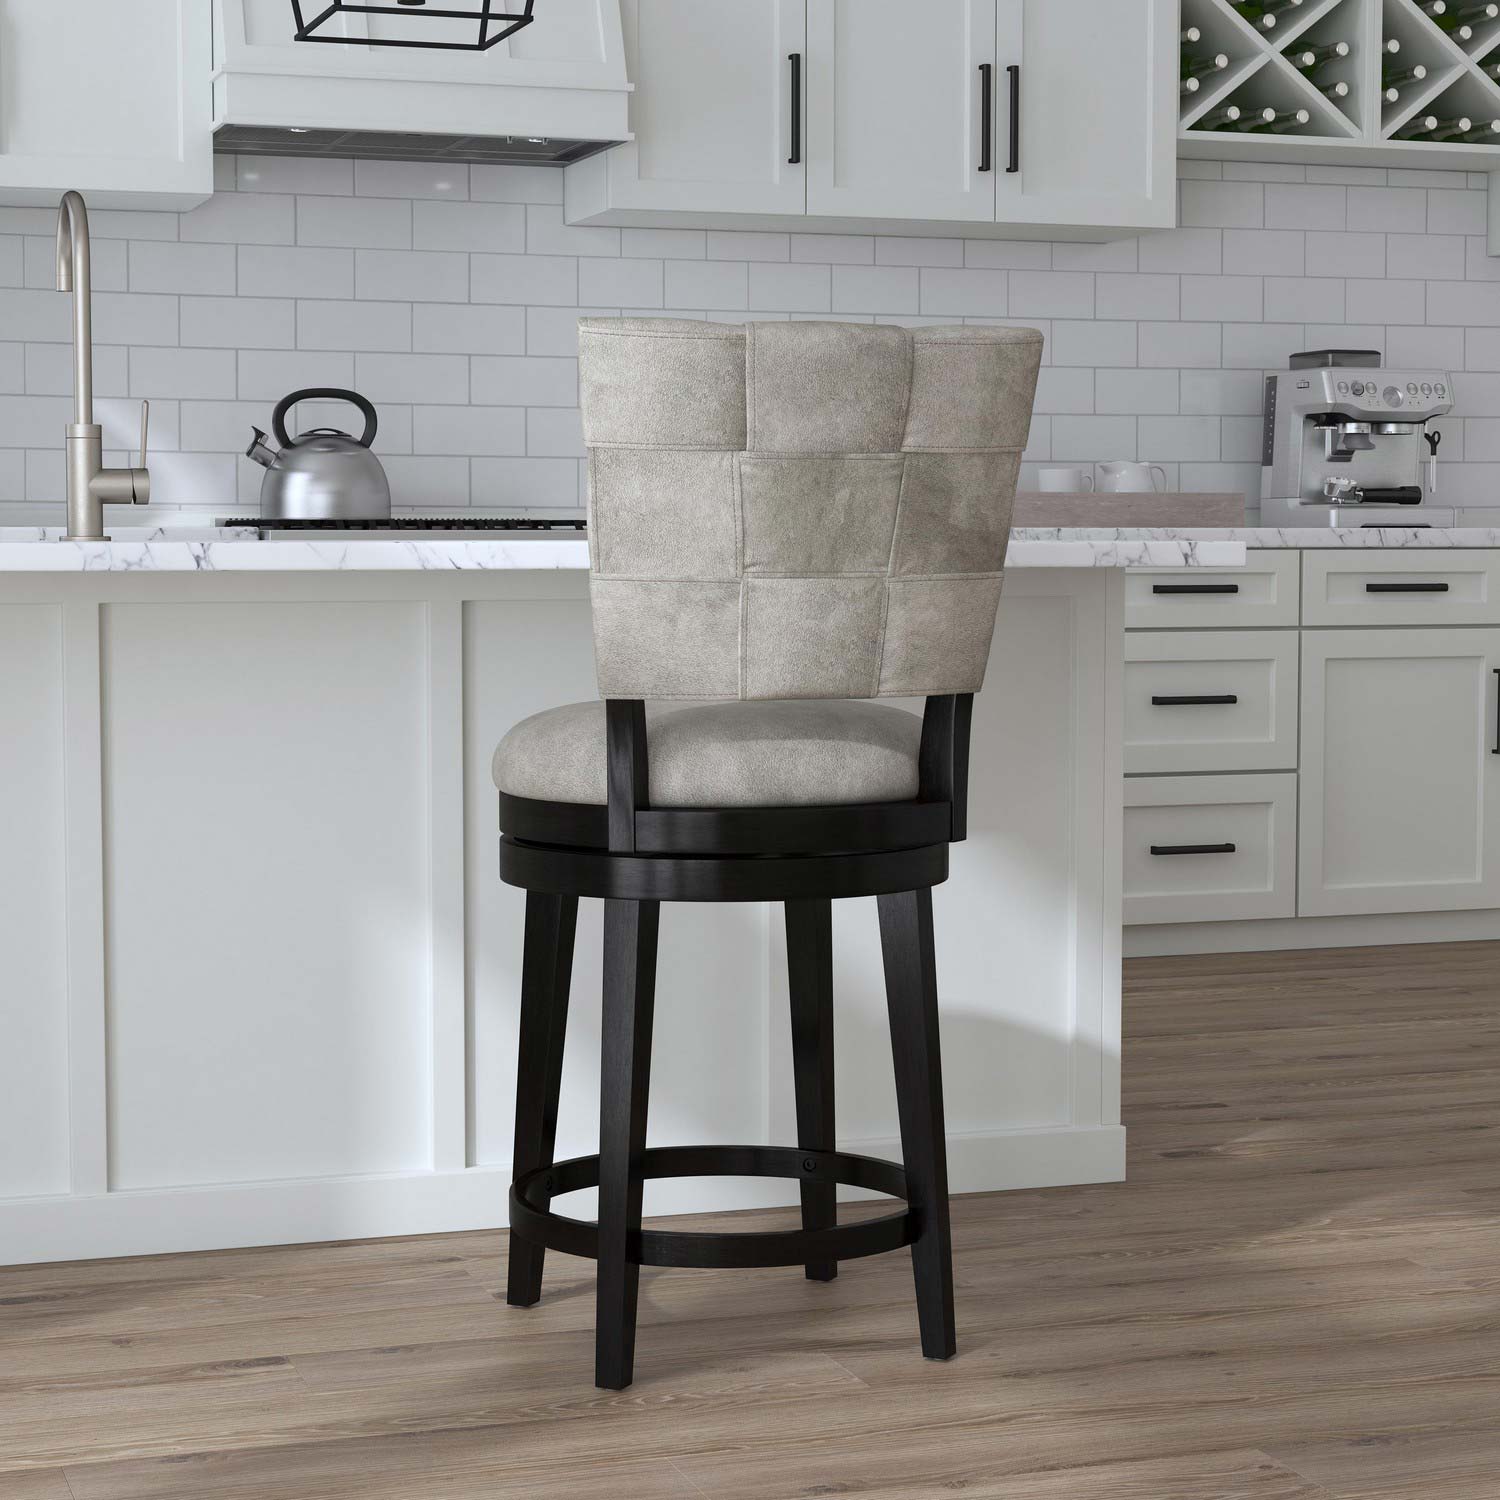 Hillsdale Kaede Wood and Upholstered Counter Height Swivel Stool - Black/Granite Gray Faux Leather